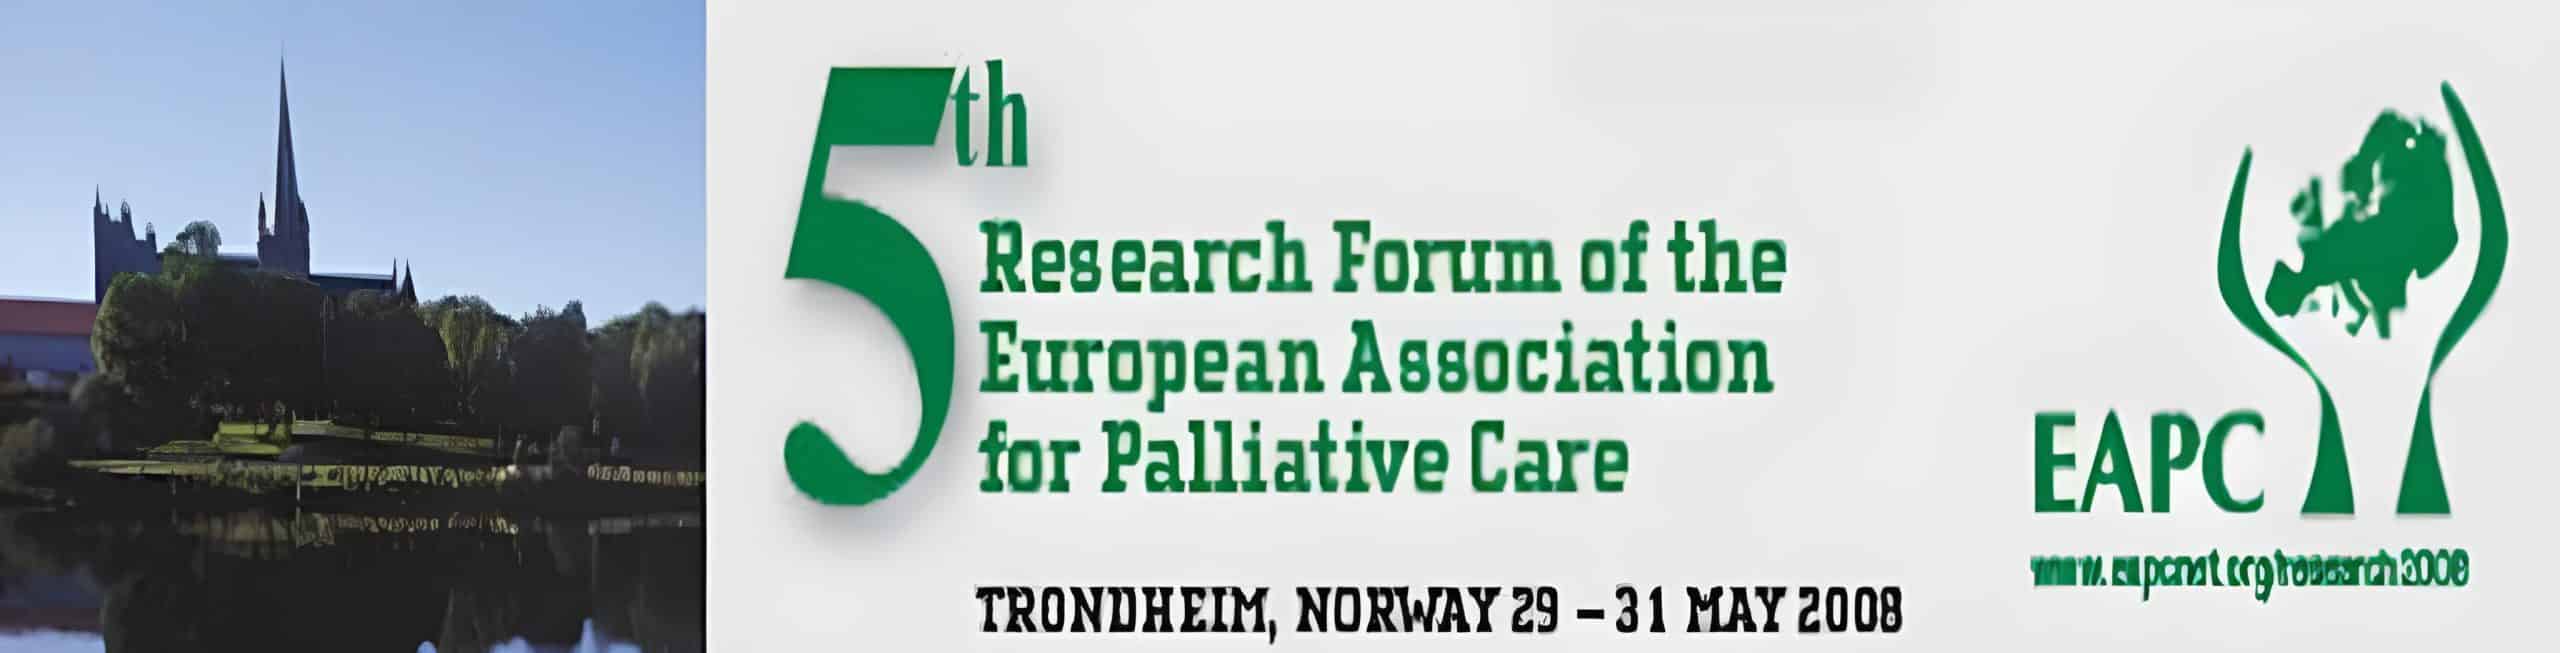 banner 5th research forum of the european association for palliative care, trondheim, norway, 29-31 may 2008